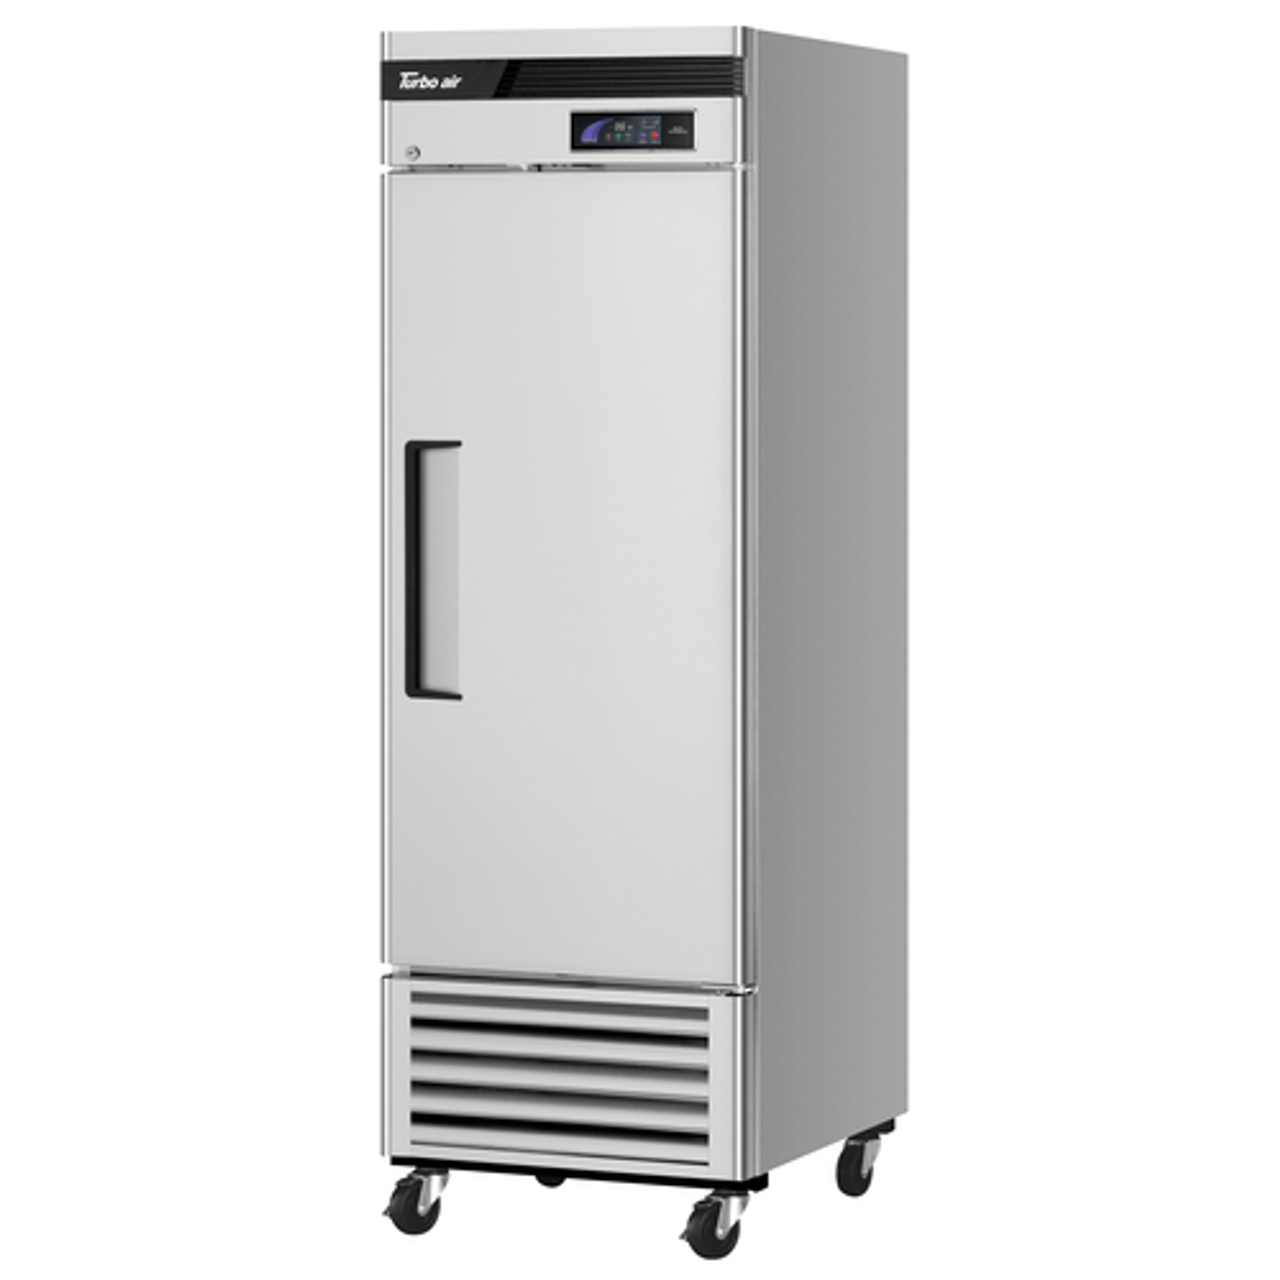 Turbo Air TSR-23SD-N6 1 Section Reach In Refrigerator - 19.03 Cu. Ft. - Super Deluxe Series